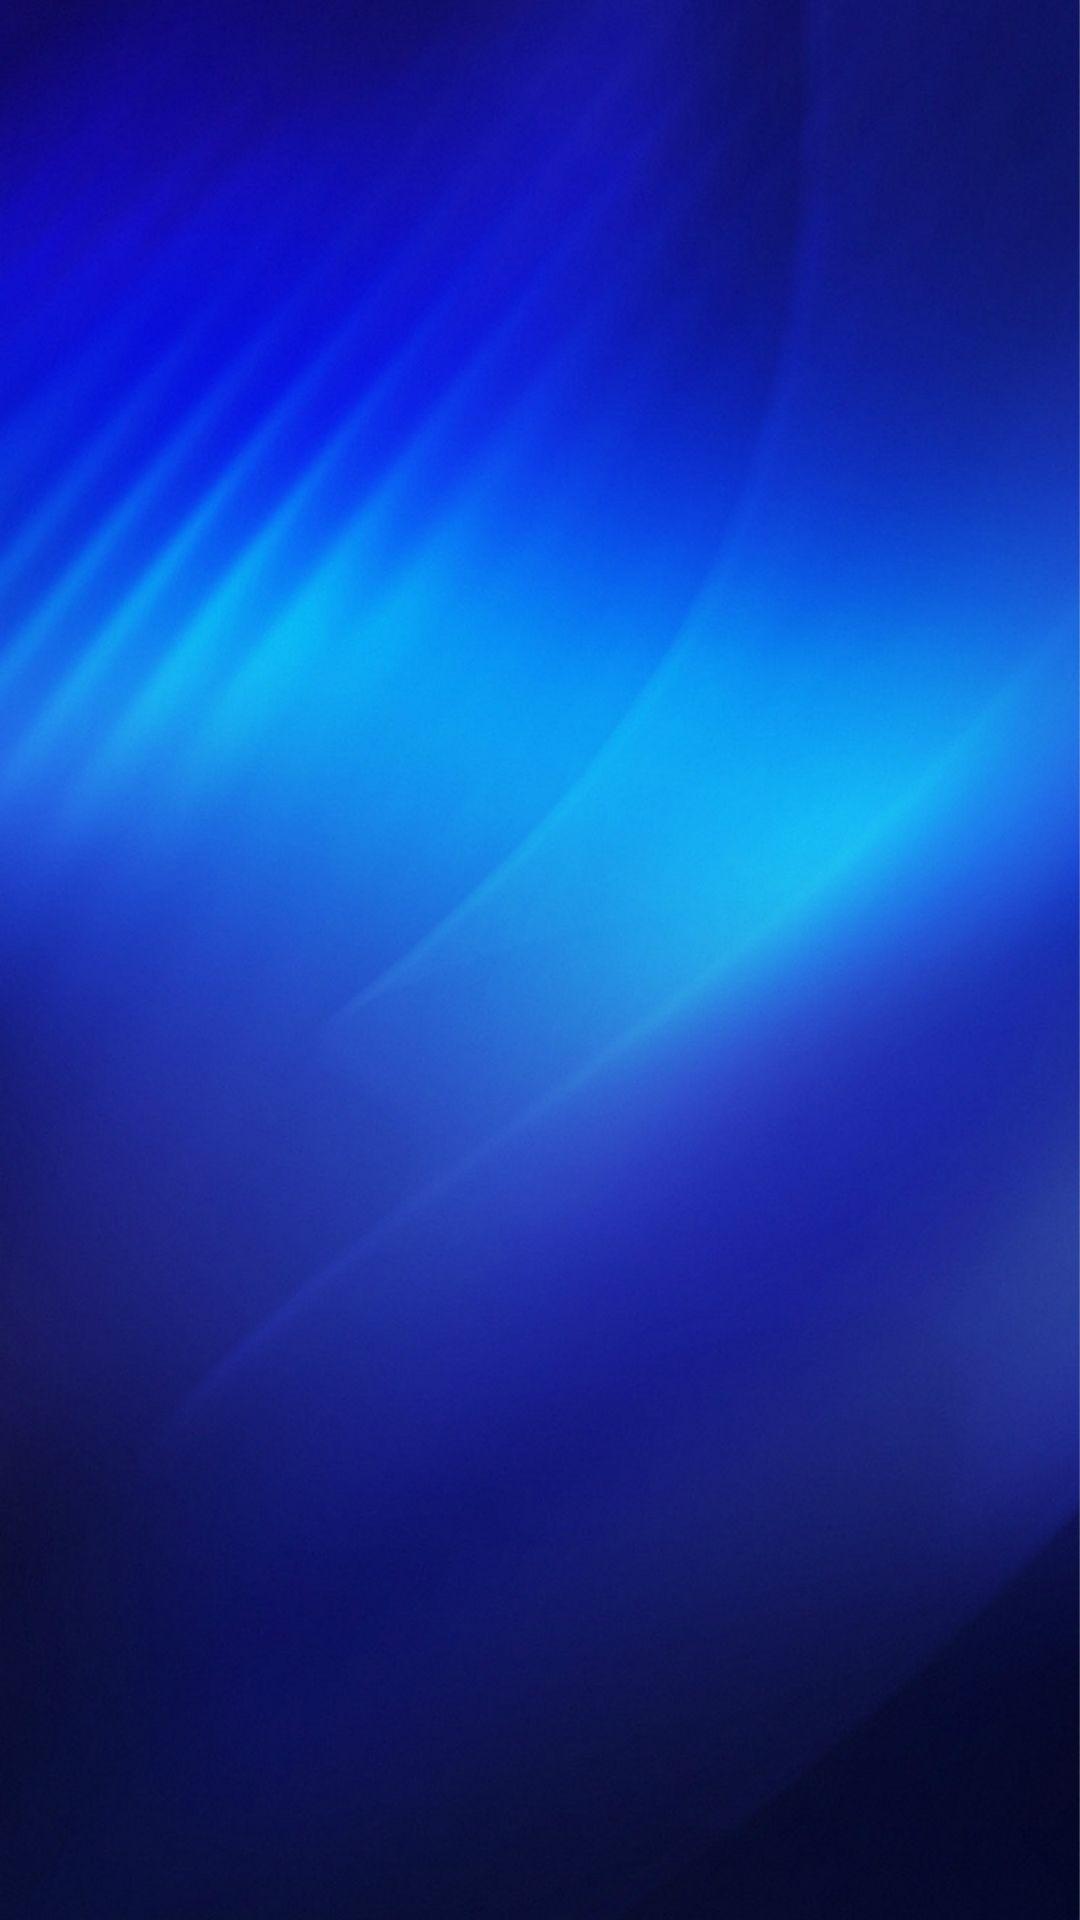 Abstract Blue Light Pattern iPhone 7 Wallpaper Download. iPhone